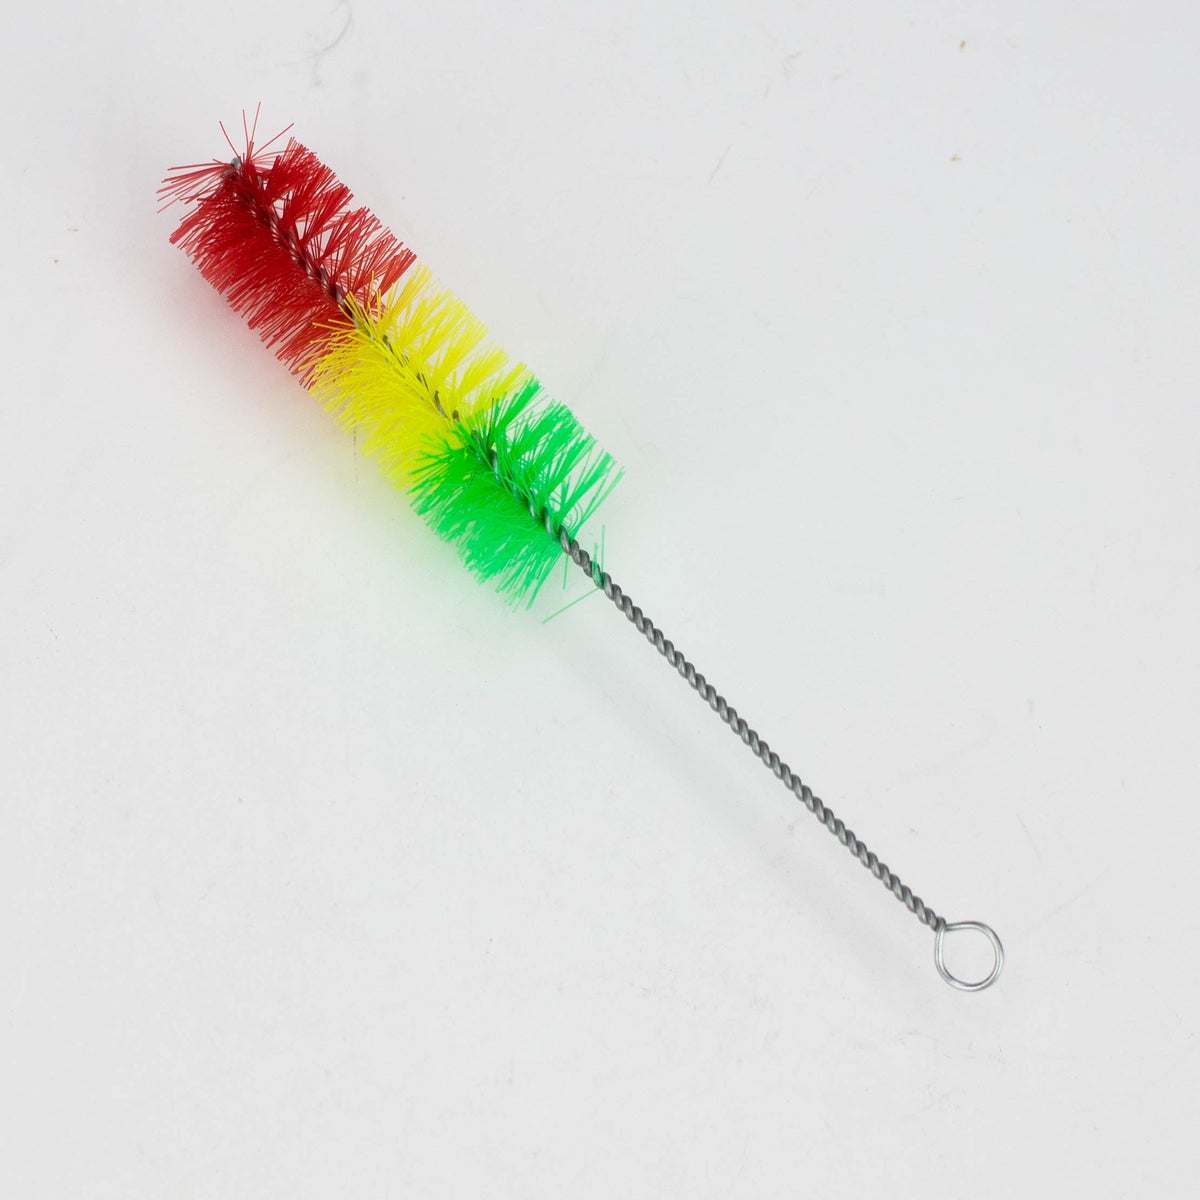 Rasta Nylon Brush 6 8 and 10 inch made of stainless steel and nylon red yellow and green